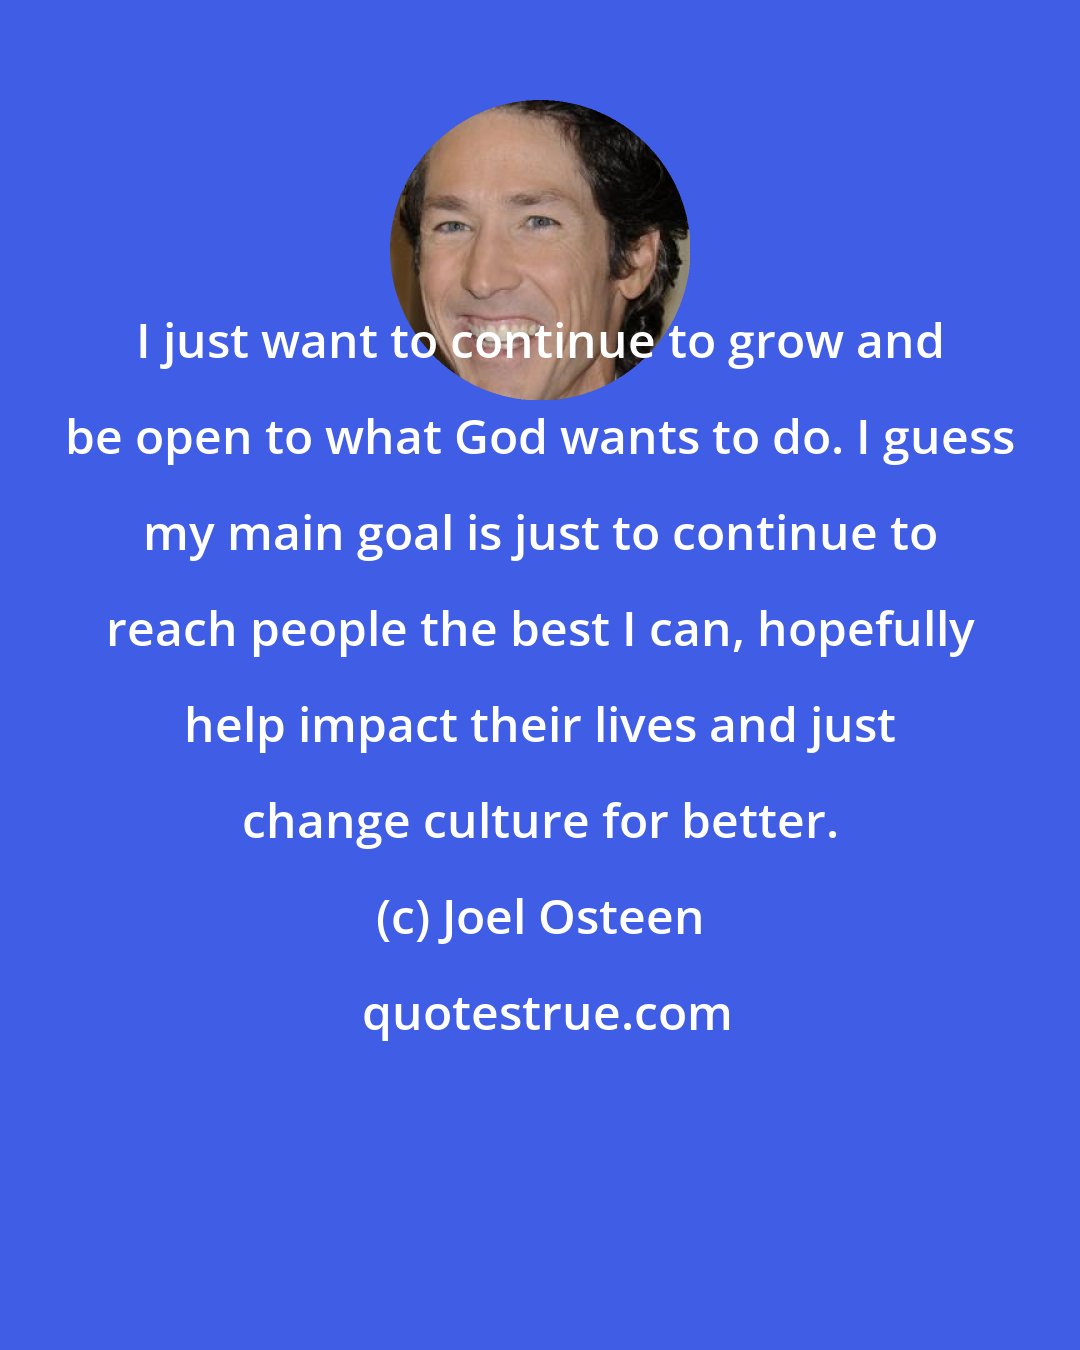 Joel Osteen: I just want to continue to grow and be open to what God wants to do. I guess my main goal is just to continue to reach people the best I can, hopefully help impact their lives and just change culture for better.